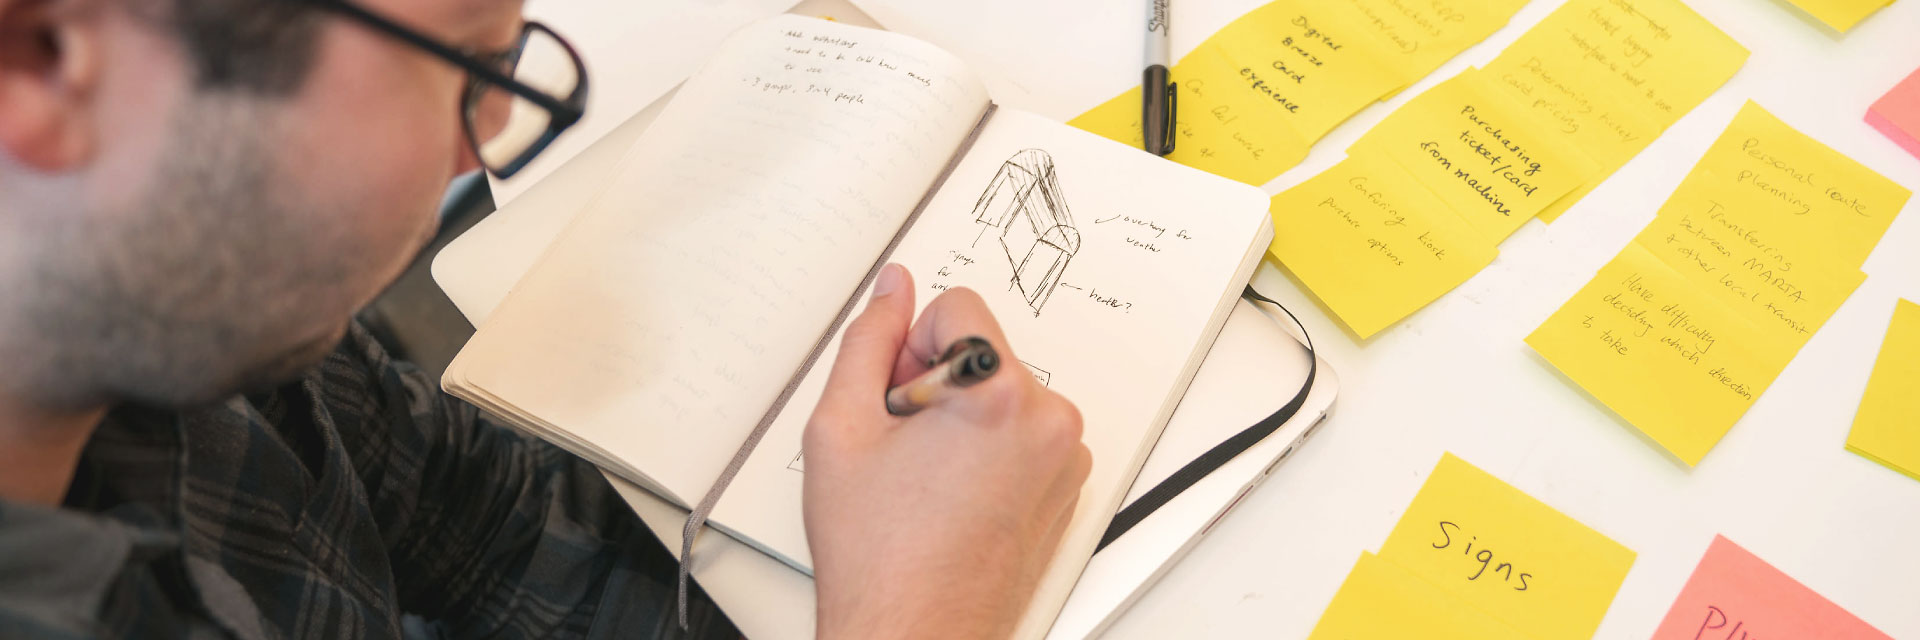 A student sketches while looking at several sticky notes on a desk.